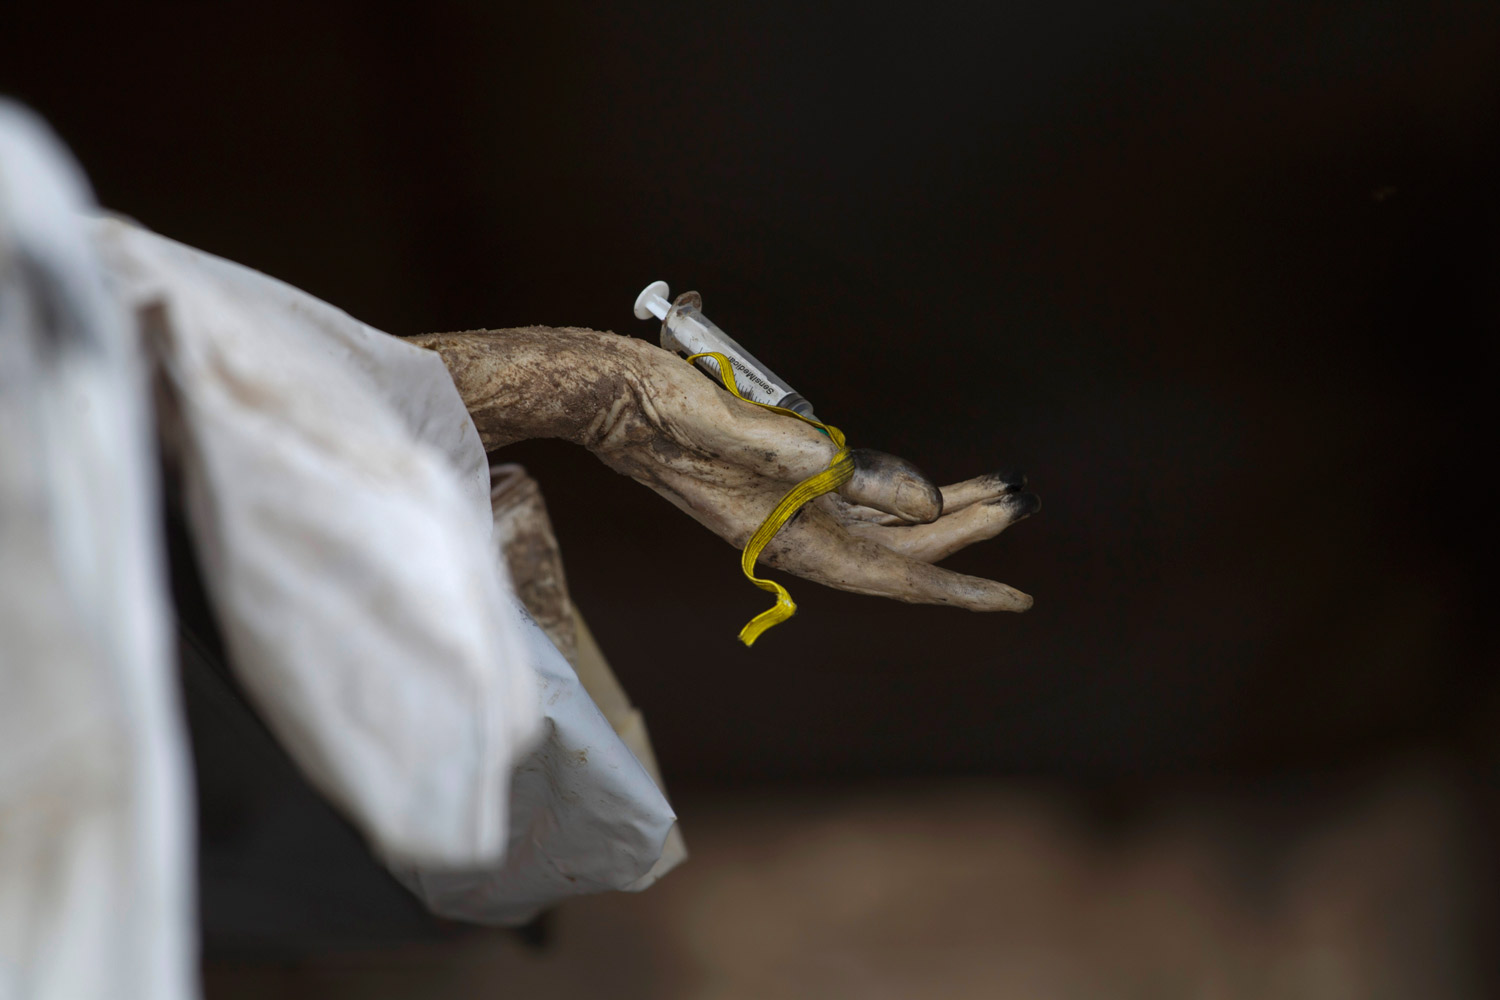 May 16, 2011. The hand of a corpse hangs from a bed with a syringe that is being used by forensic experts at a makeshift morgue inside a refrigerated container as they try to identify bodies found in mass clandestine graves in Durango, Mexico.